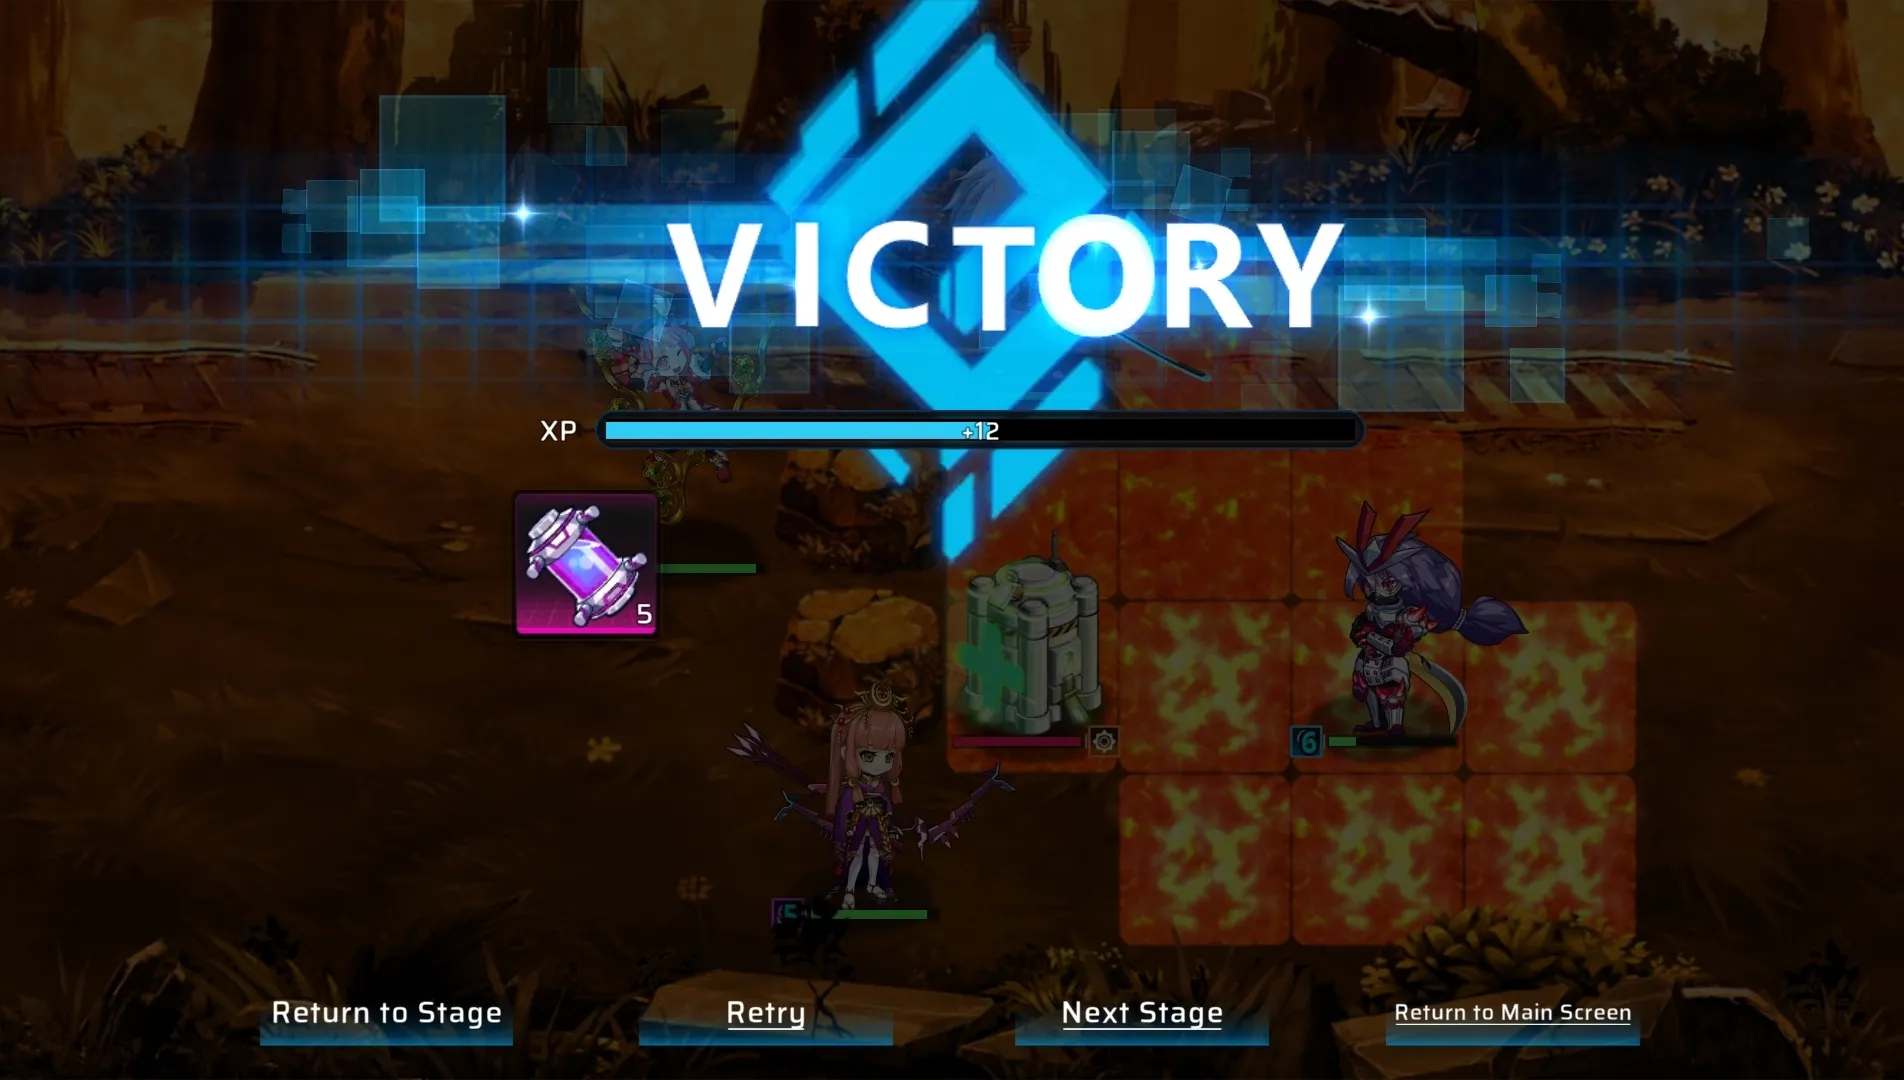 The picture shows the Victory poster of WonderHero after finishing a game. It displays the rewards that players receive for completing the round.